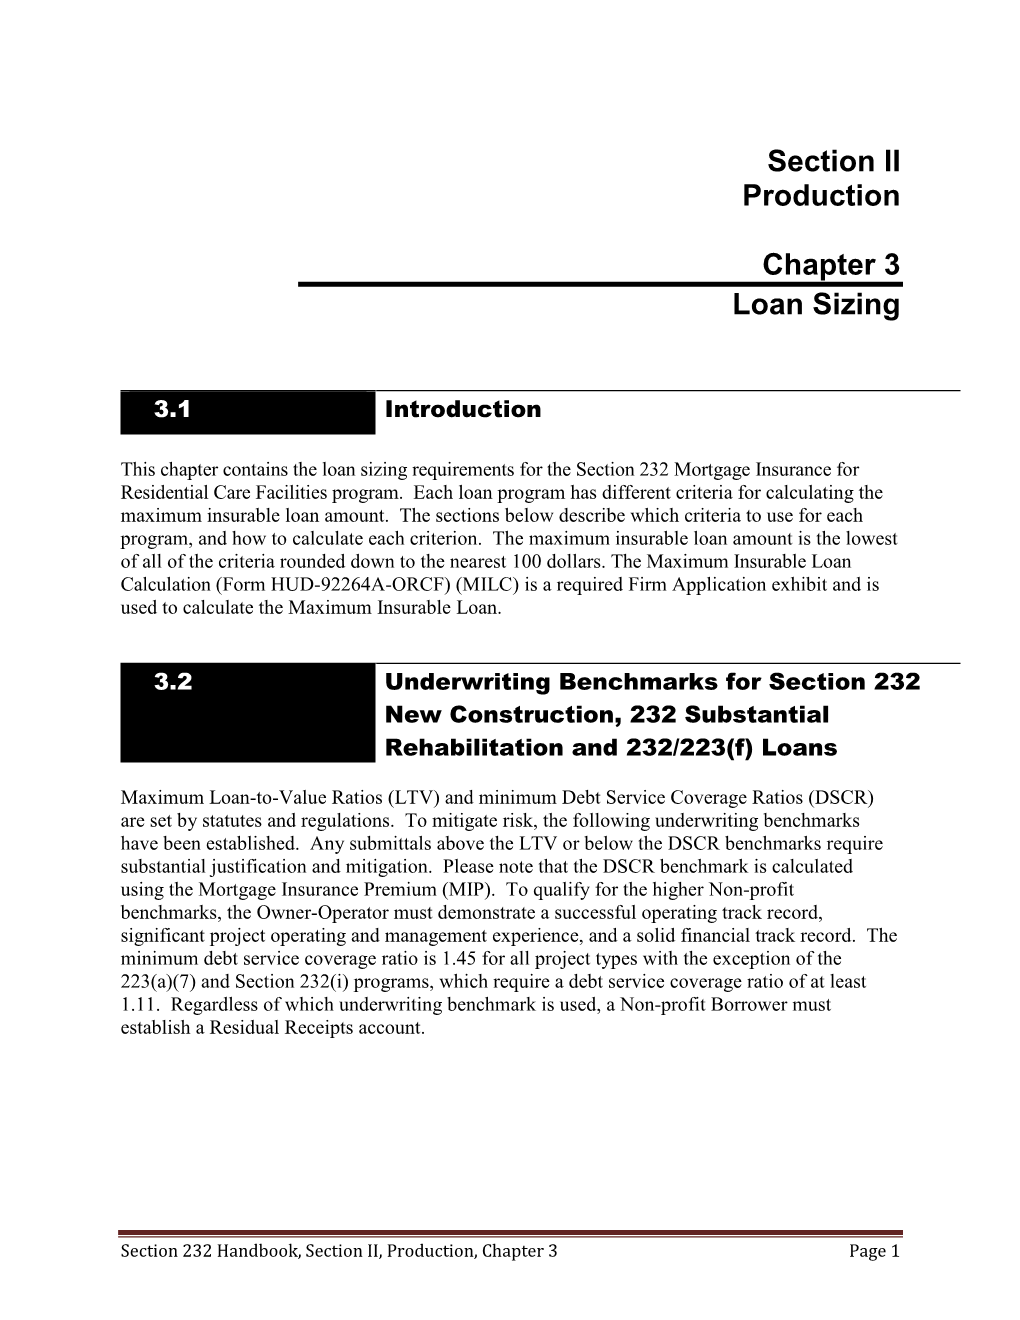 Section II Production Chapter 3 Loan Sizing